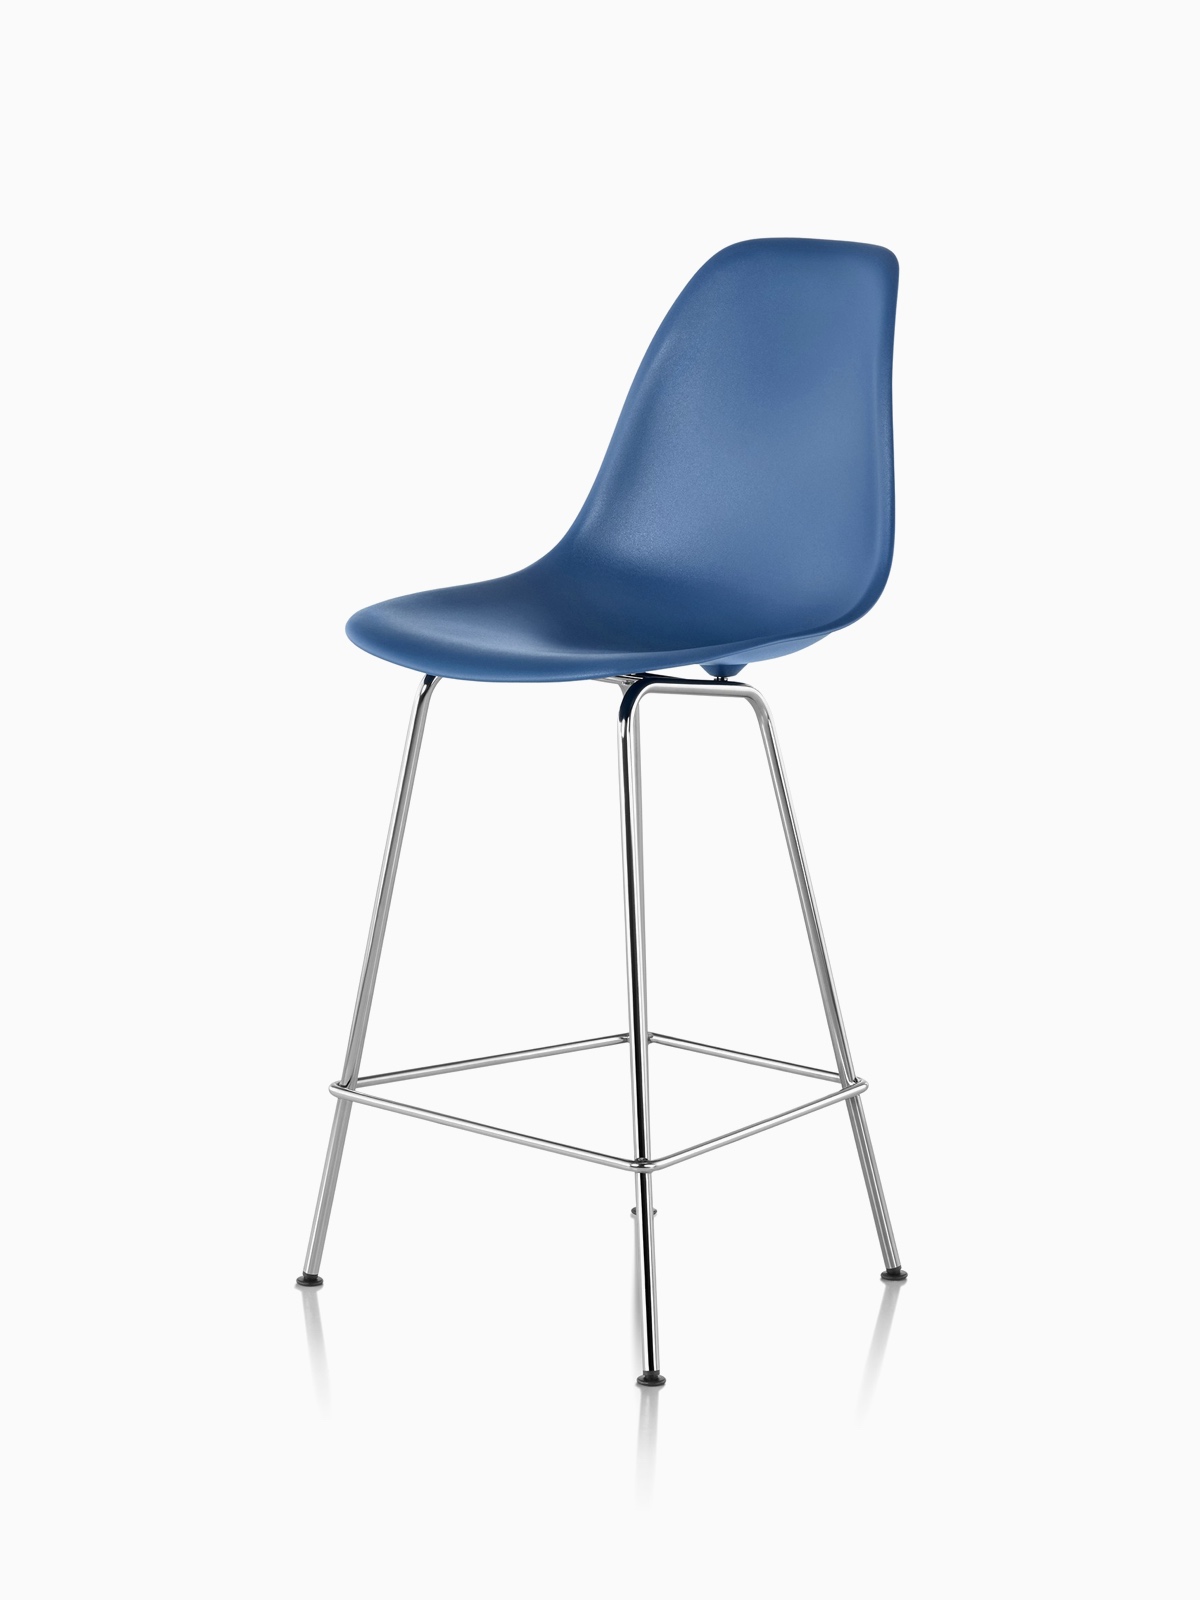 Eames Molded Plastic Stool, Counter Height